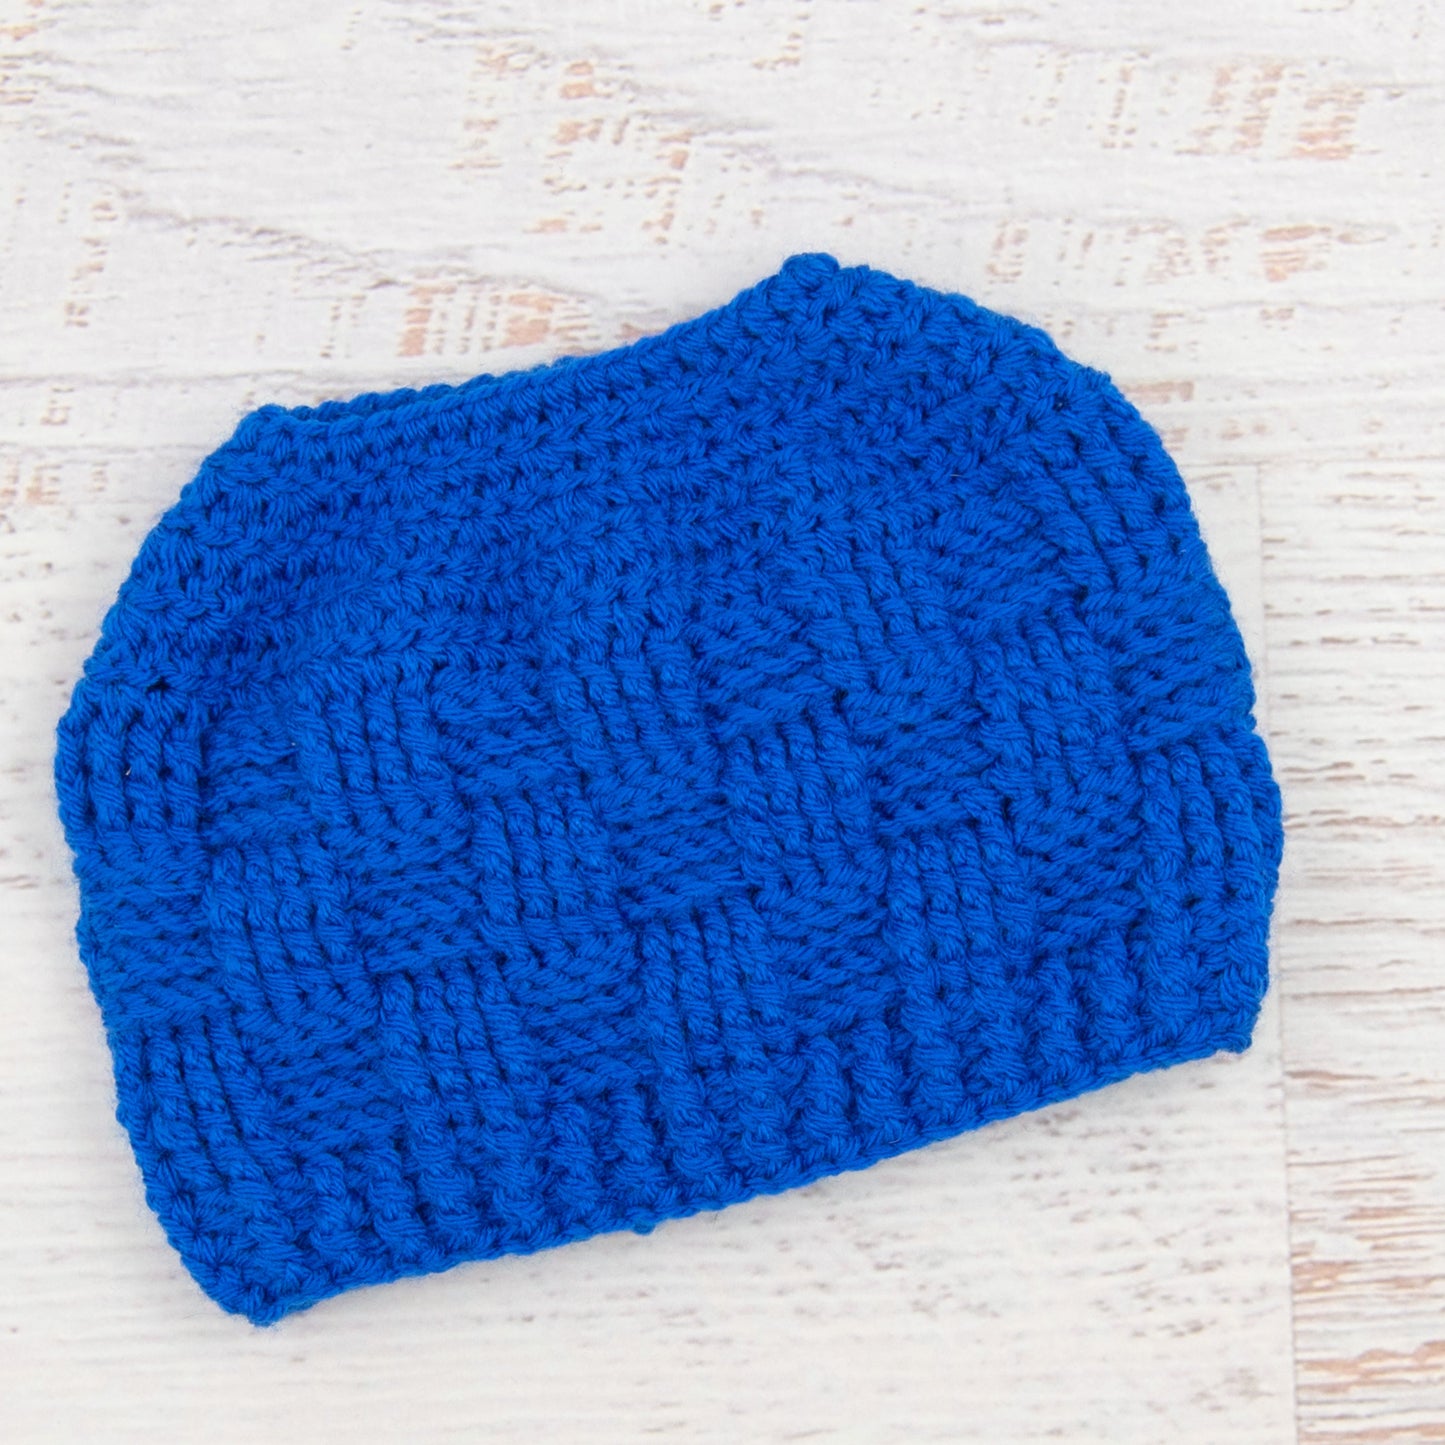 In-Stock 3-10 Year The 'Everyday' Messy Bun Hat in Electric Blue